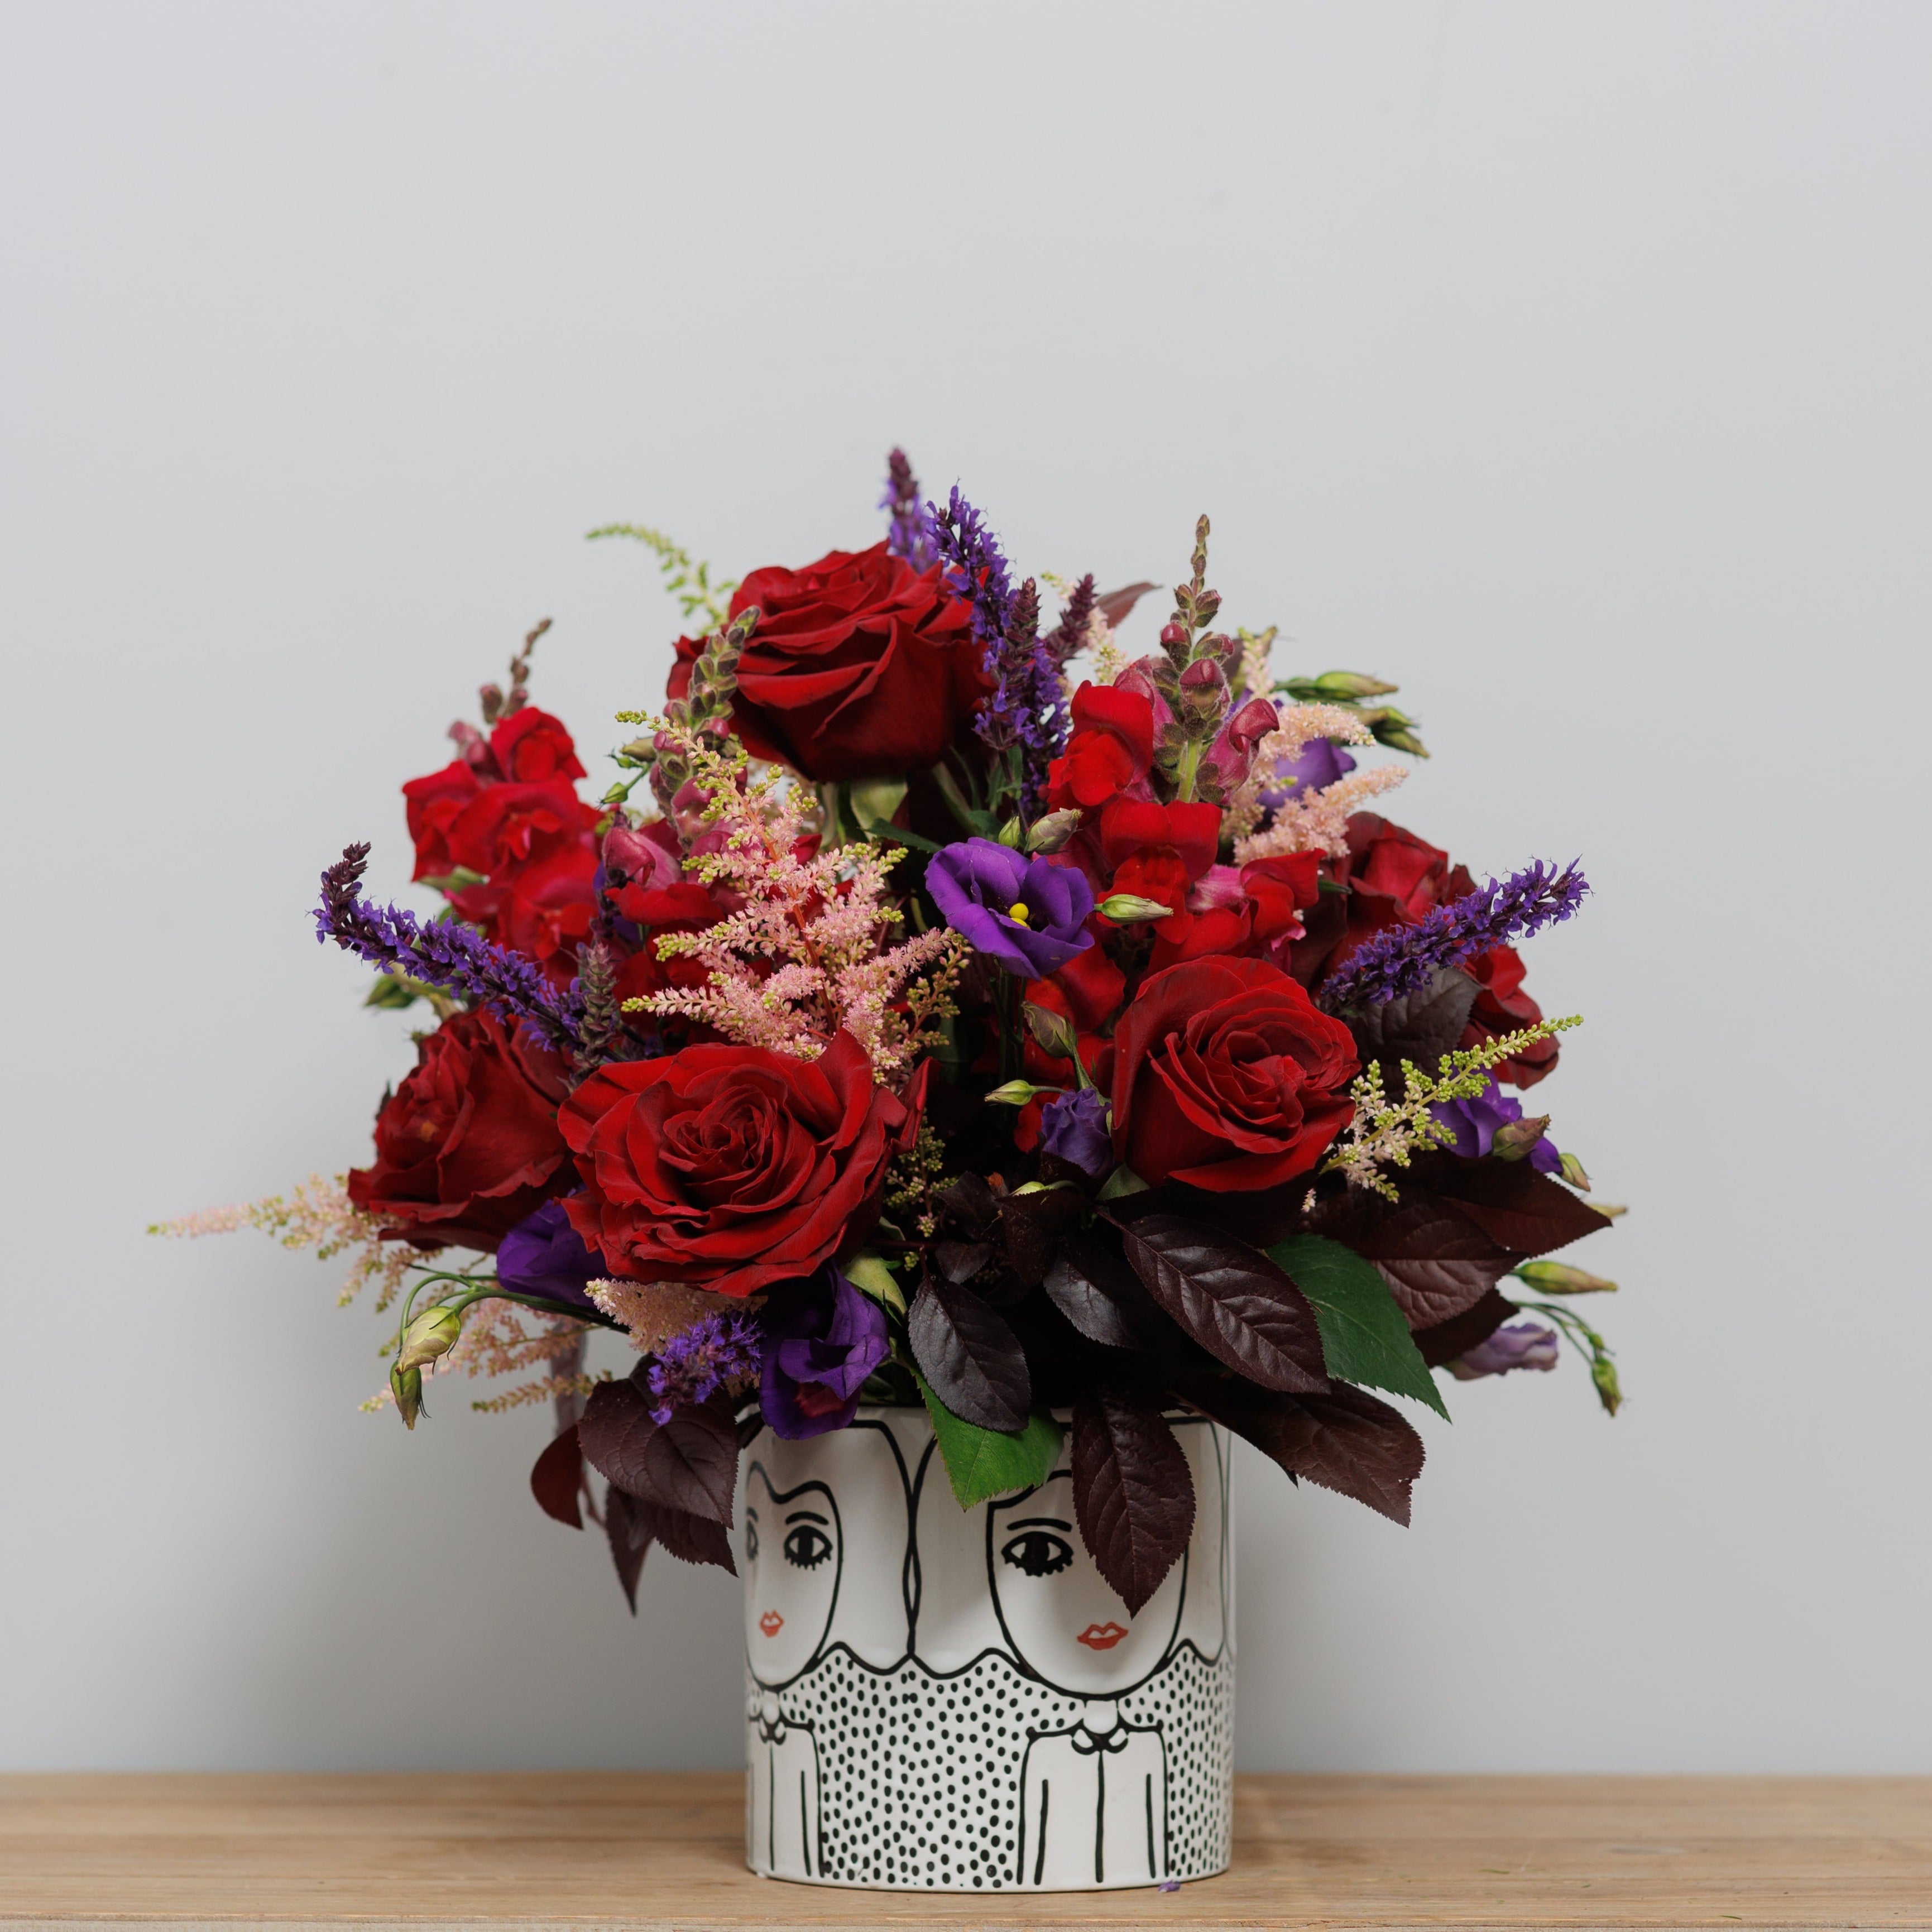 Dark and dramatic flowers in a keepsake pot.